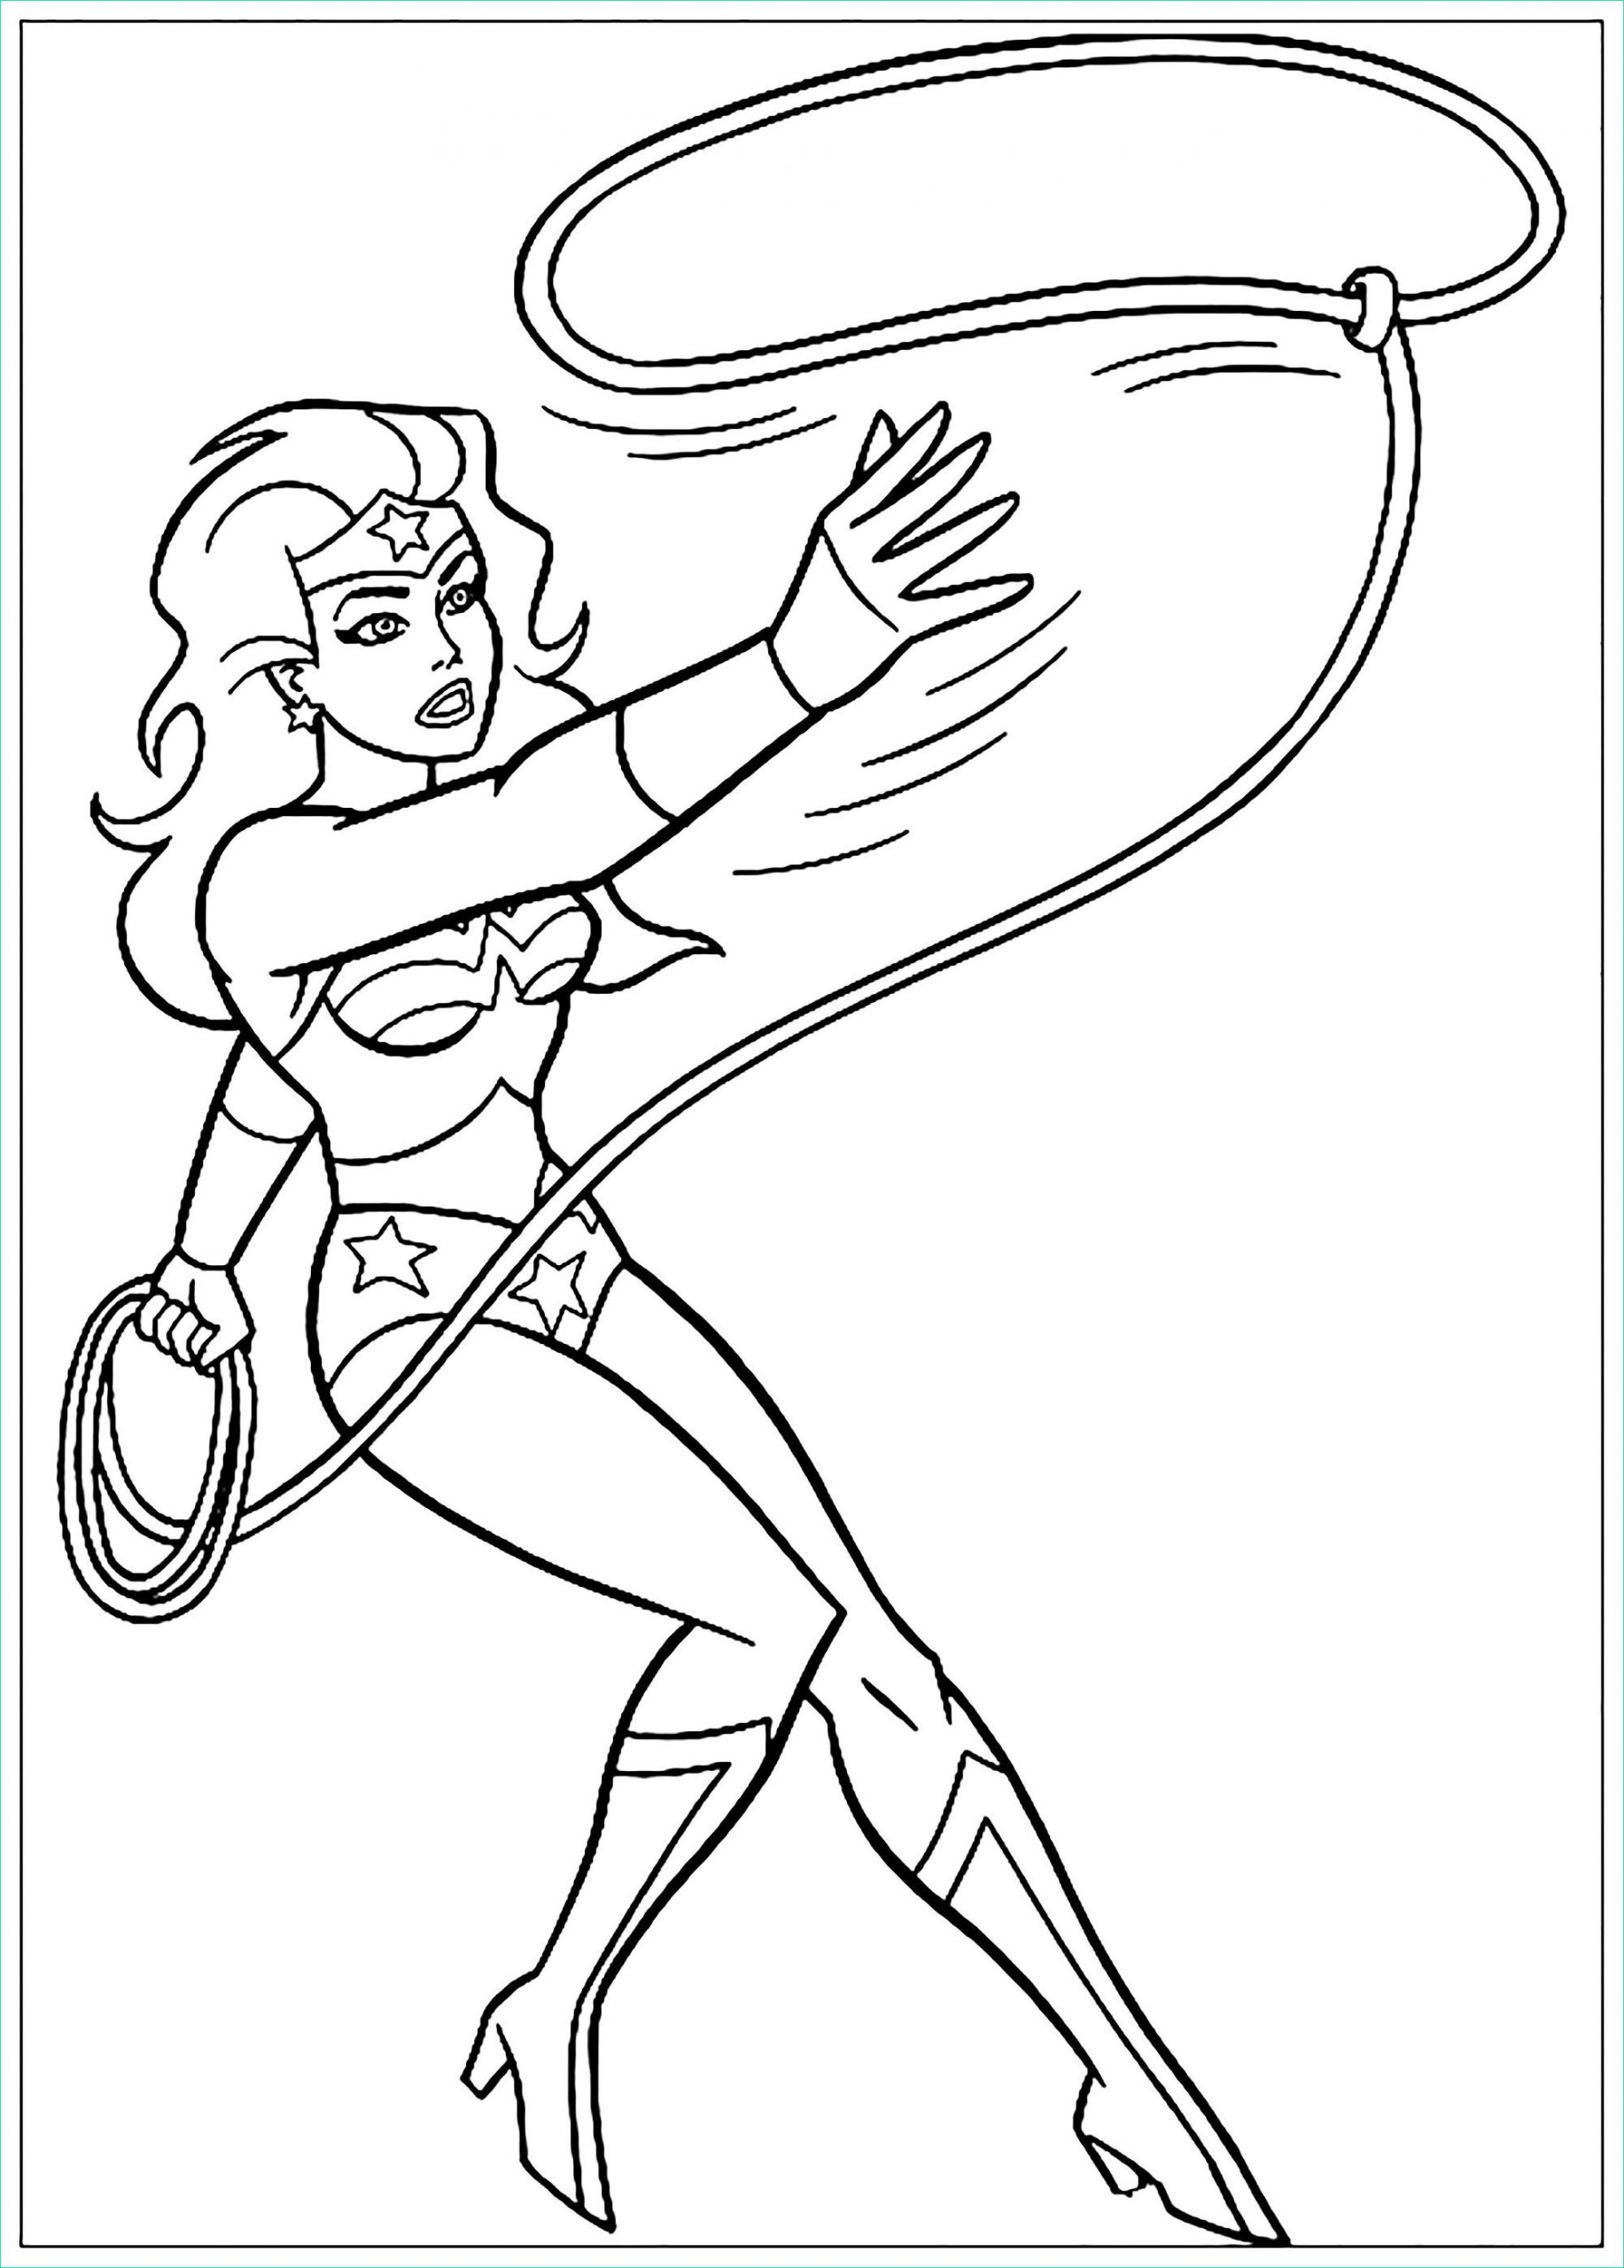 Coloriage Super Heroine Luxe Photographie 8 Brillant Coloriage Super Heroine S Coloriage